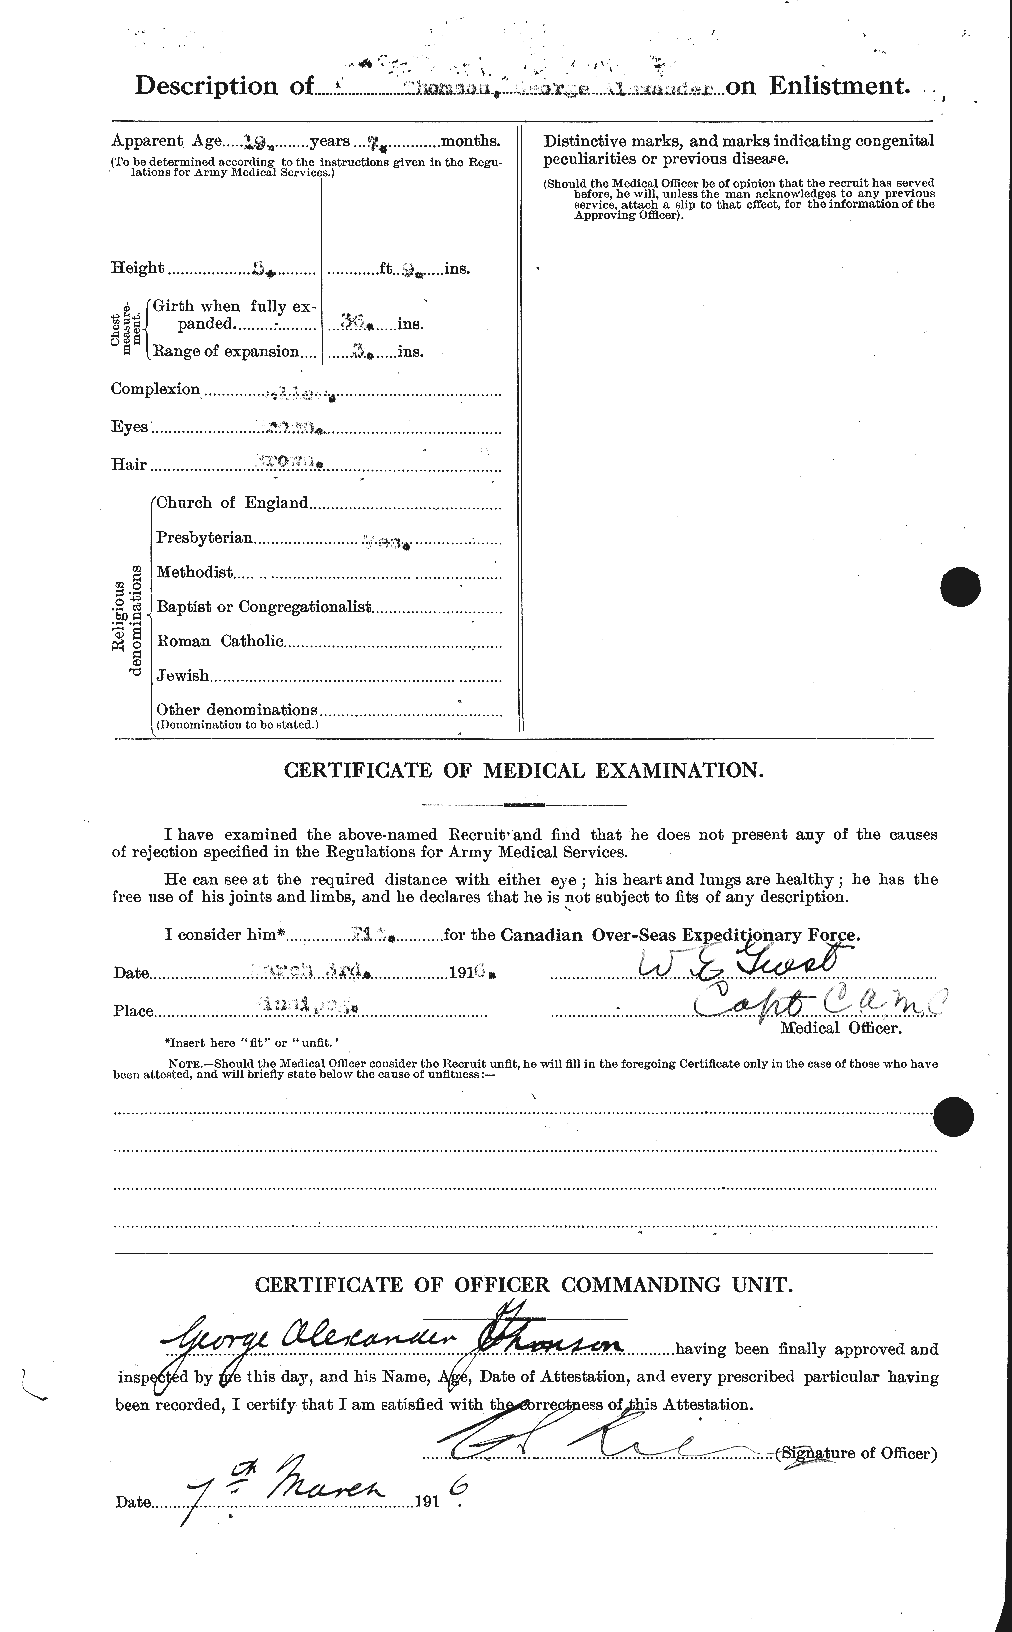 Personnel Records of the First World War - CEF 633704b